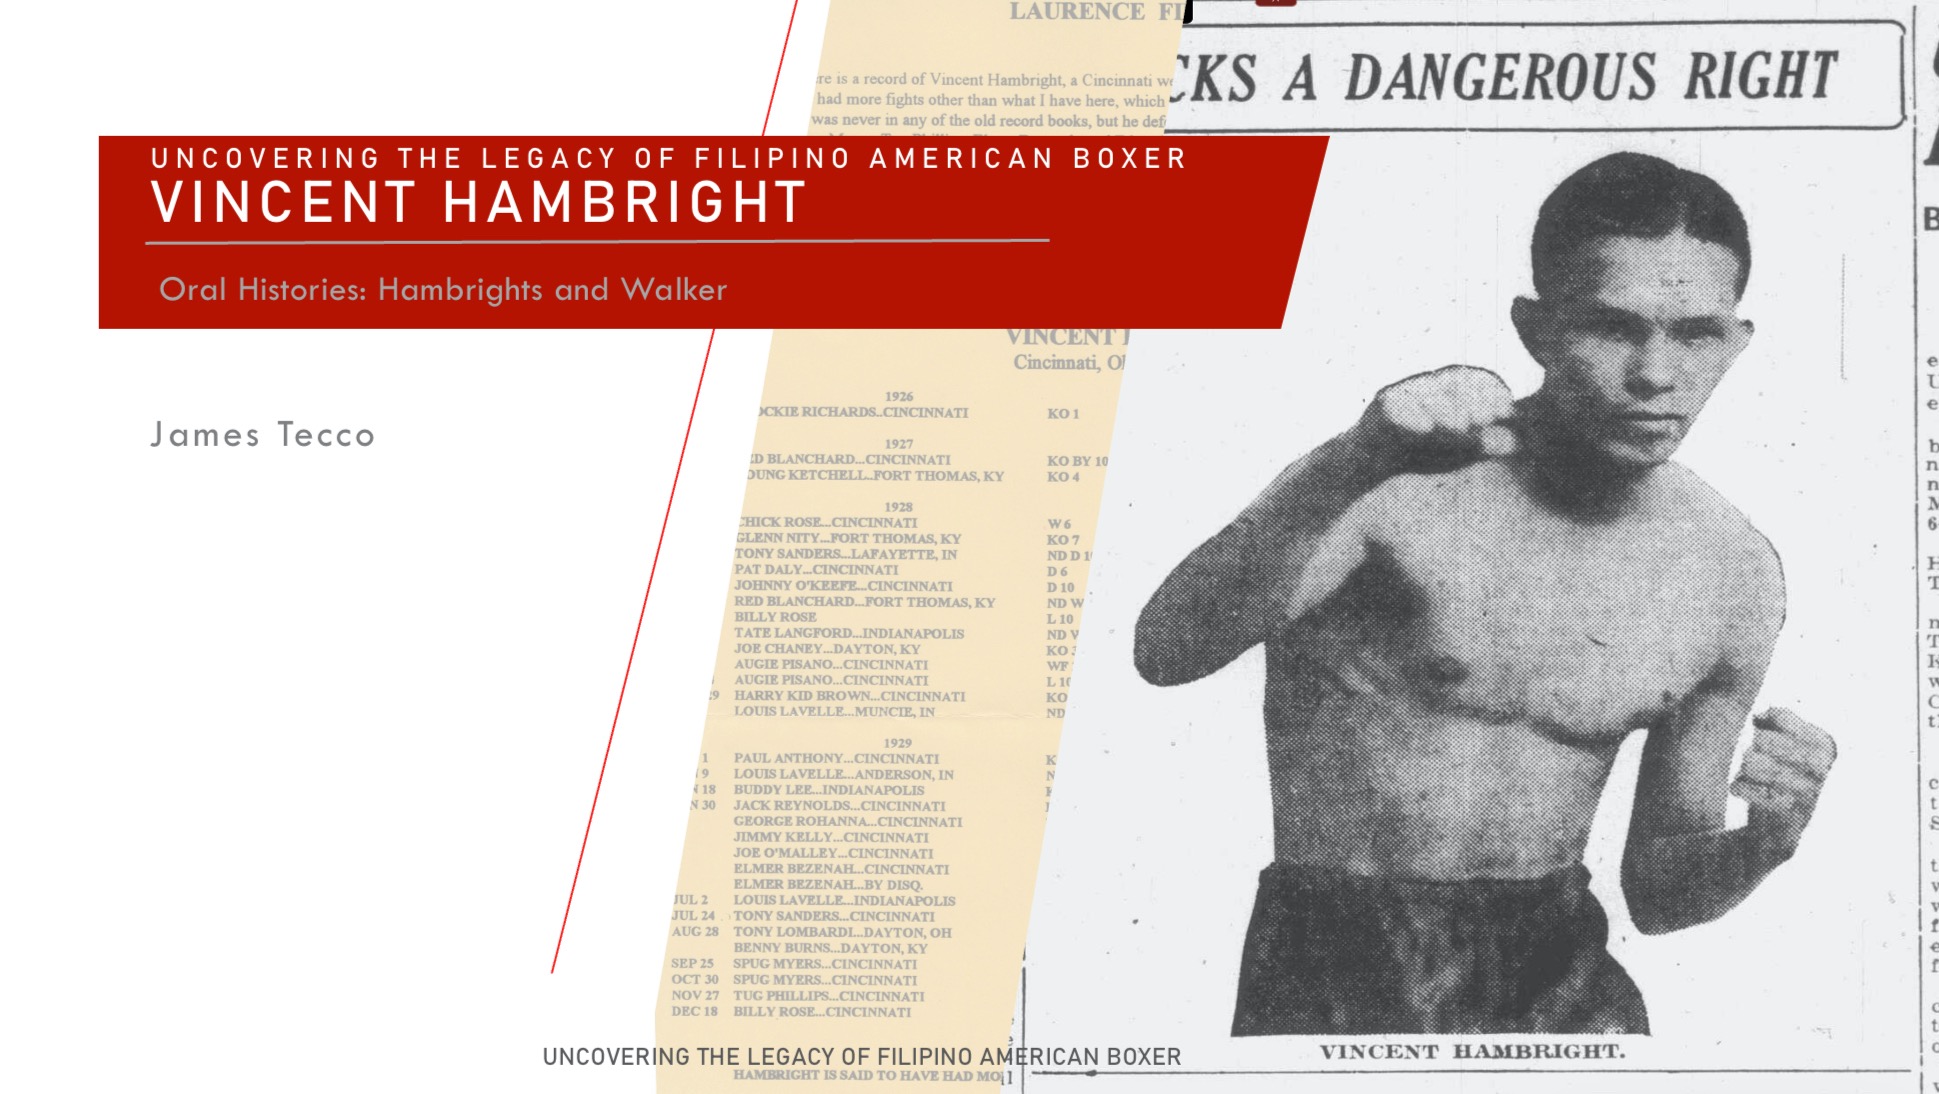 The Life, Times, and Murder of Vincent Hambright